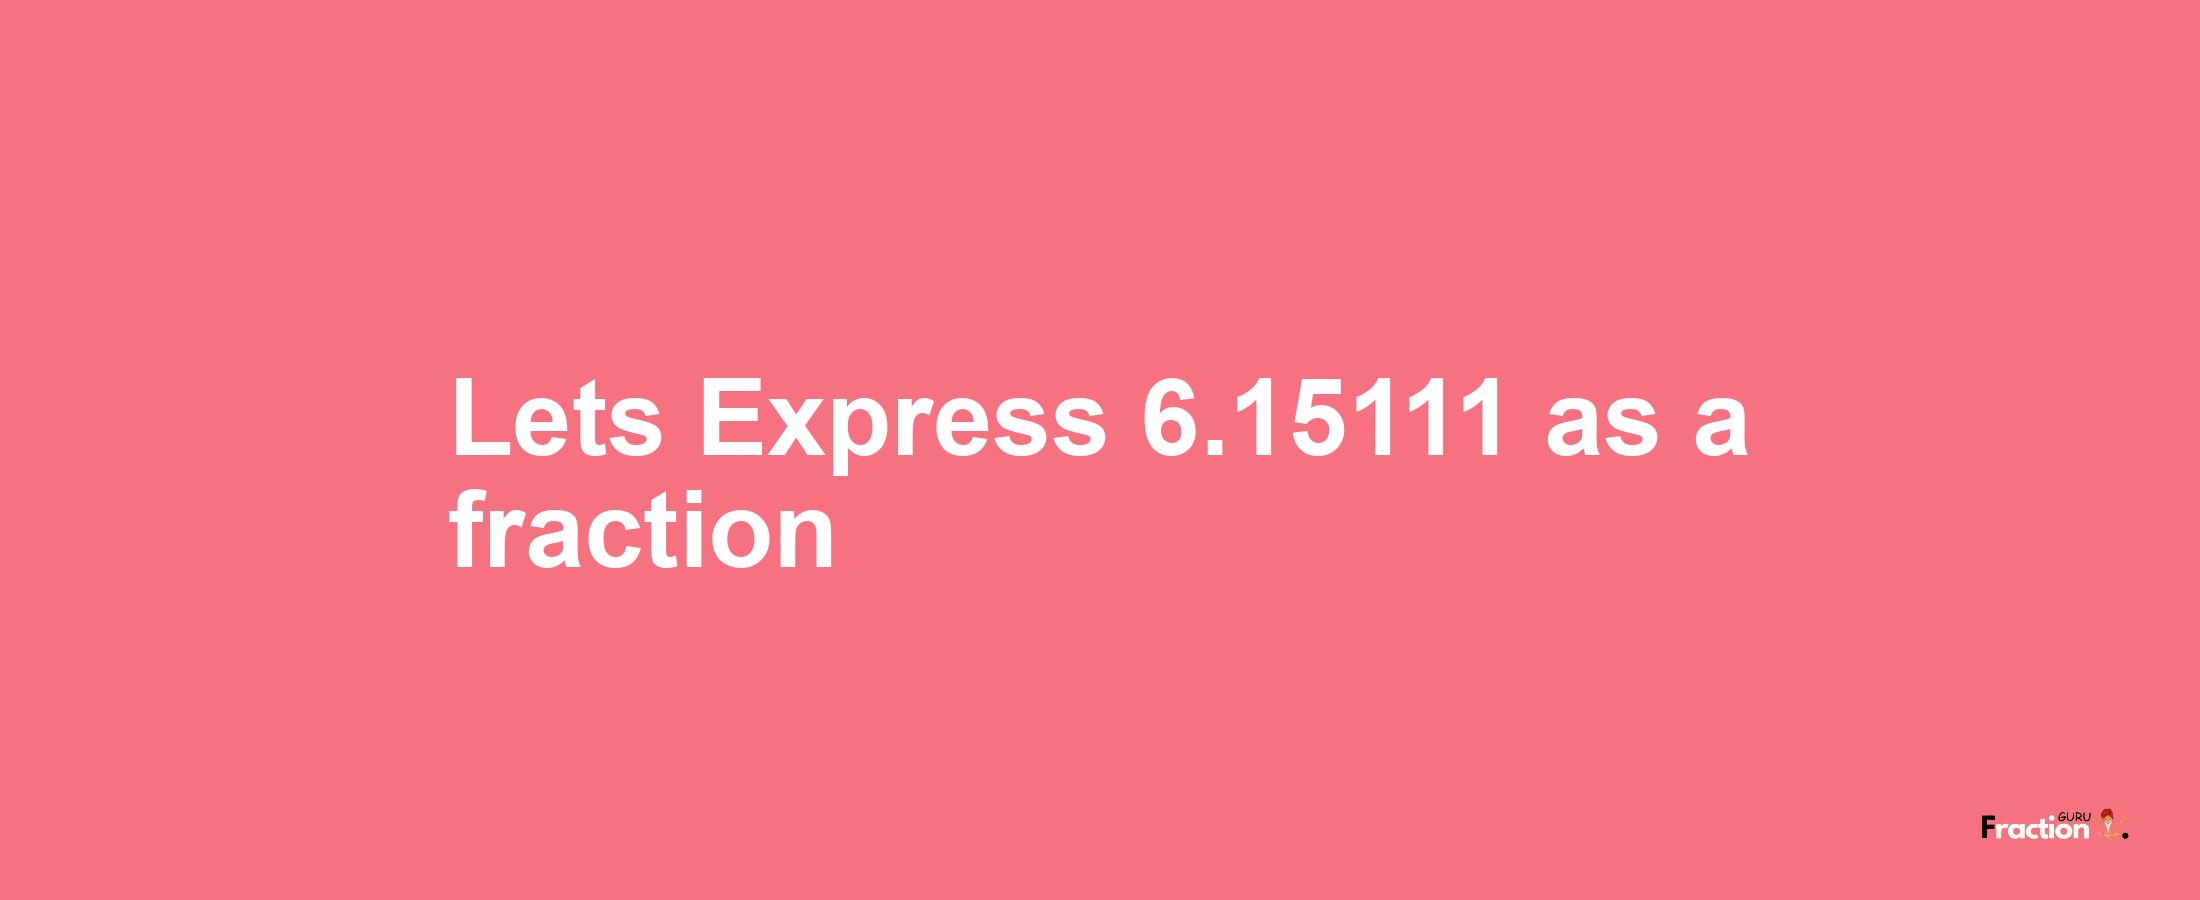 Lets Express 6.15111 as afraction